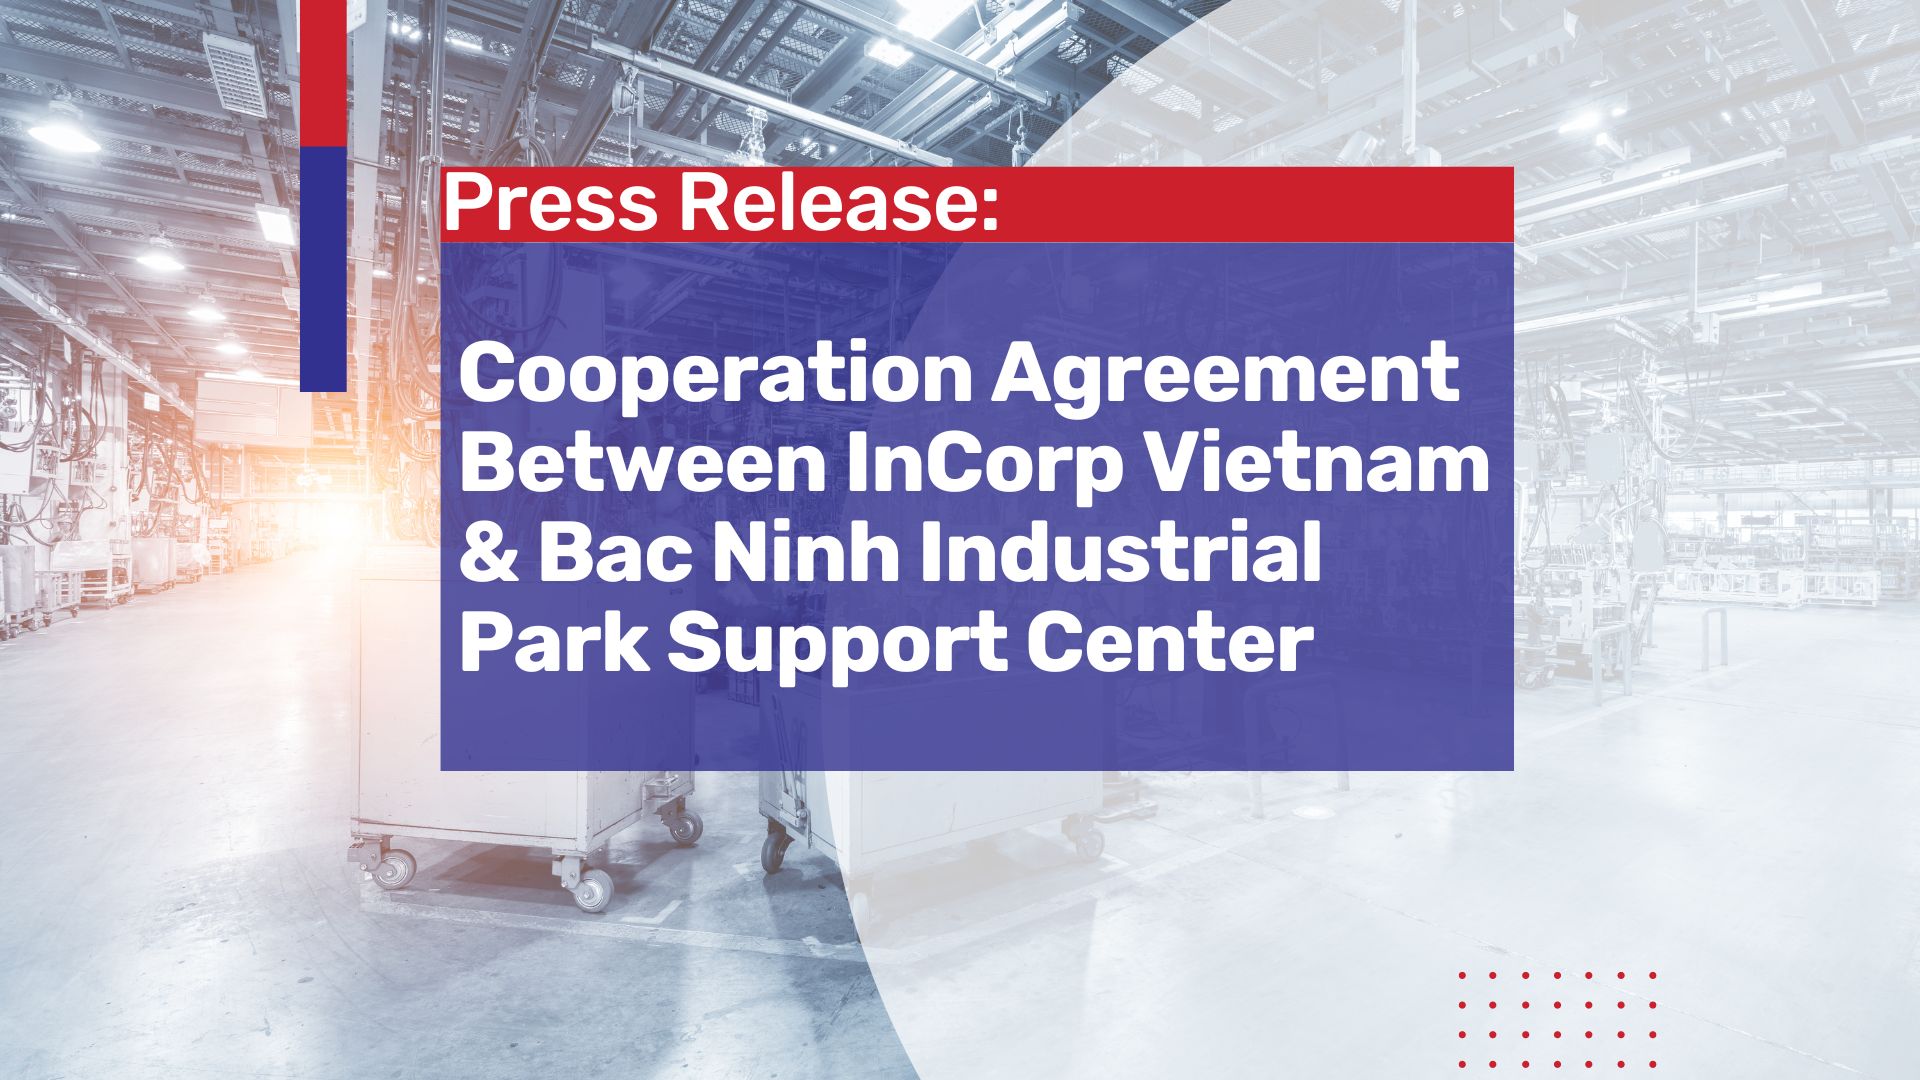 Press Release: Cooperation Agreement Between InCorp Vietnam & Bac Ninh Industrial Park Support Center